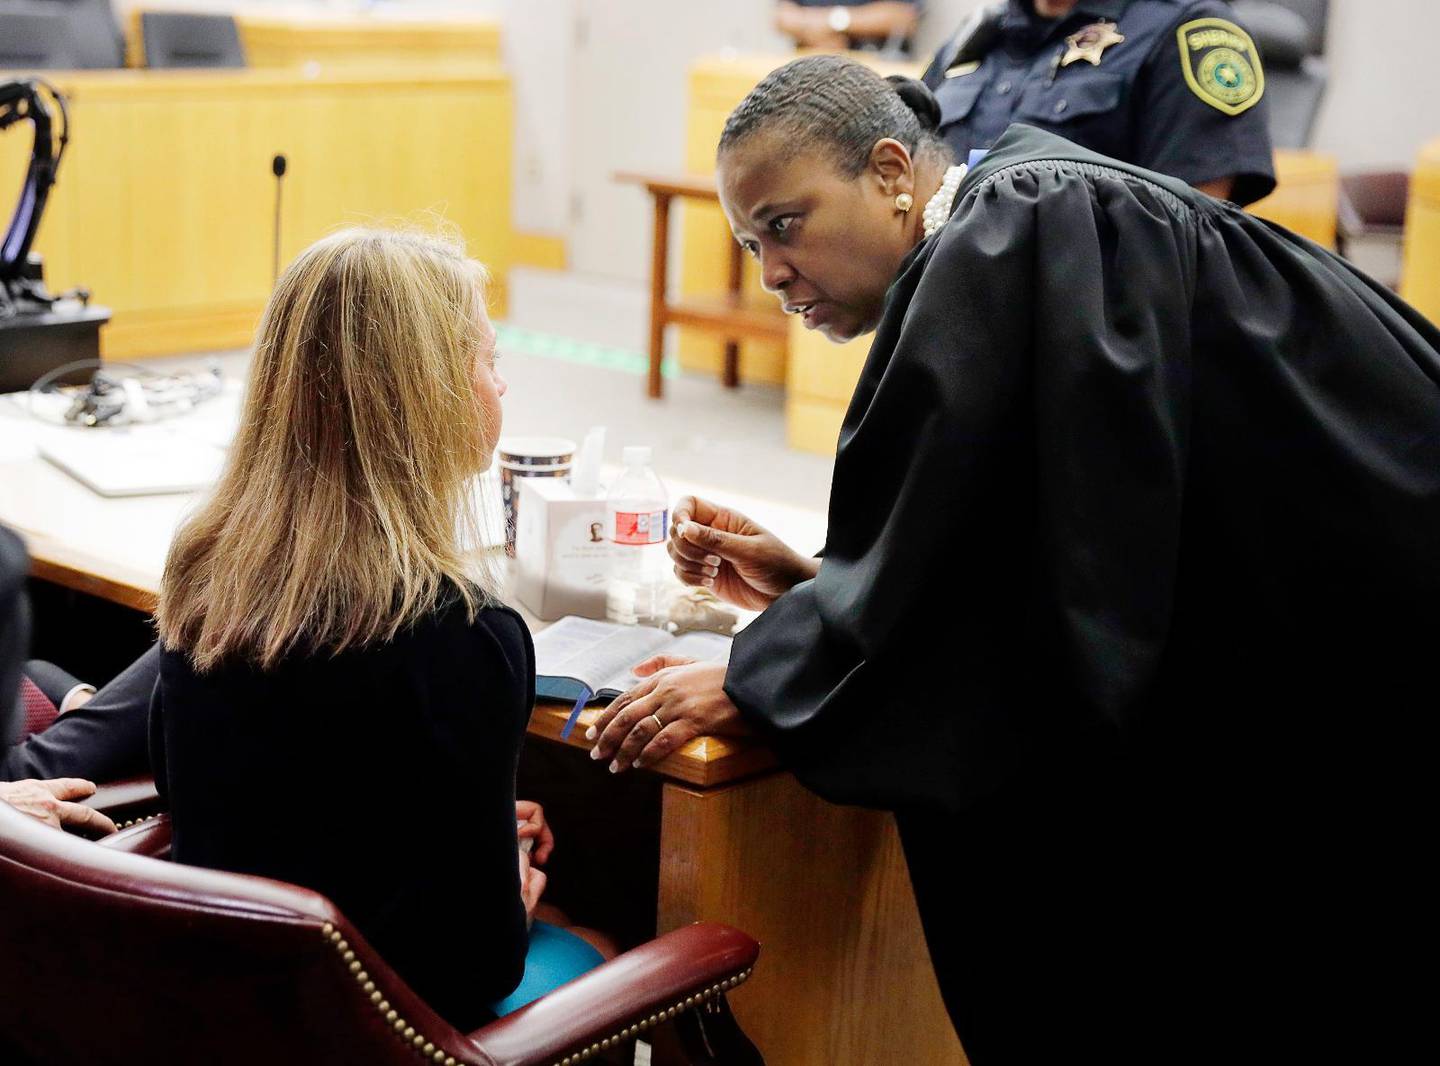 Former Dallas Police Officer Amber Guyger, left, listens to words of advice and encouragement from State District Judge Tammy Kemp after the judge had given her a Bible and before Guyger left for jail, Wednesday, Oct. 2, 2019, in Dallas. Guyger, who said she mistook neighbor Botham Jean''s apartment for her own and fatally shot him in his living room, was sentenced to a decade in prison. (Tom Fox/The Dallas Morning News via AP, Pool)  TXDAM611